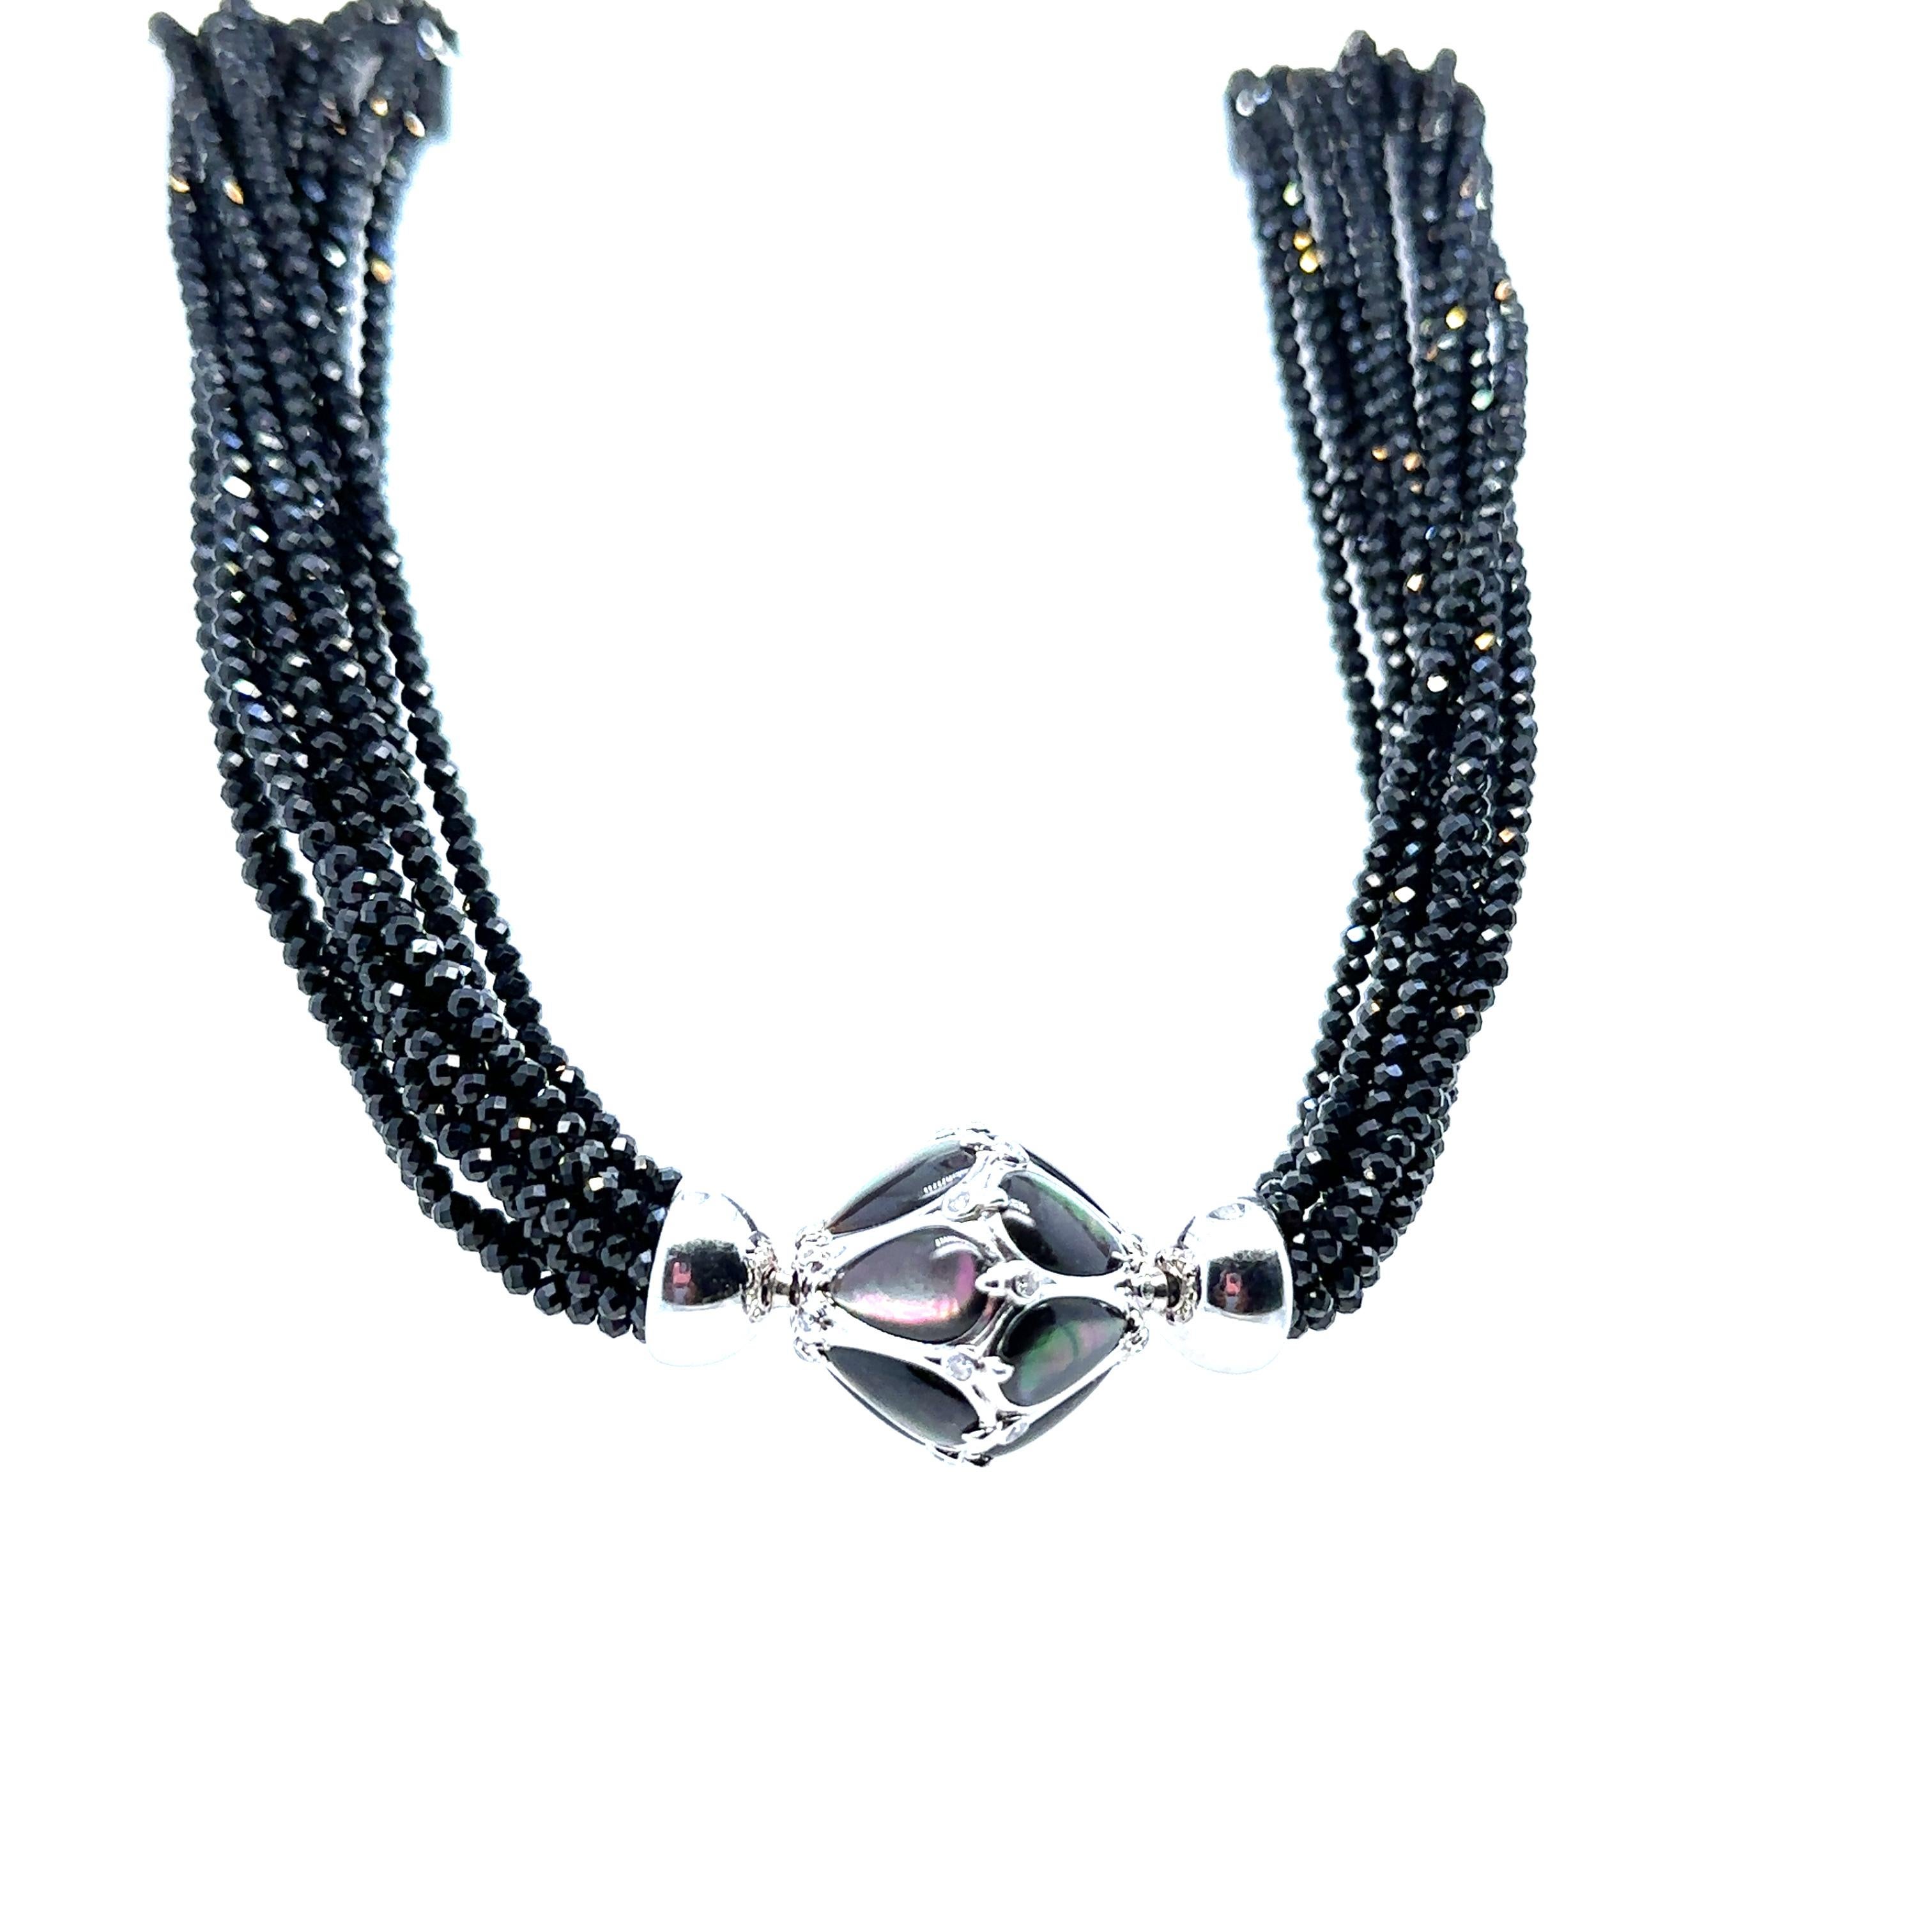 Women's Paspaley Black Spinel Necklace